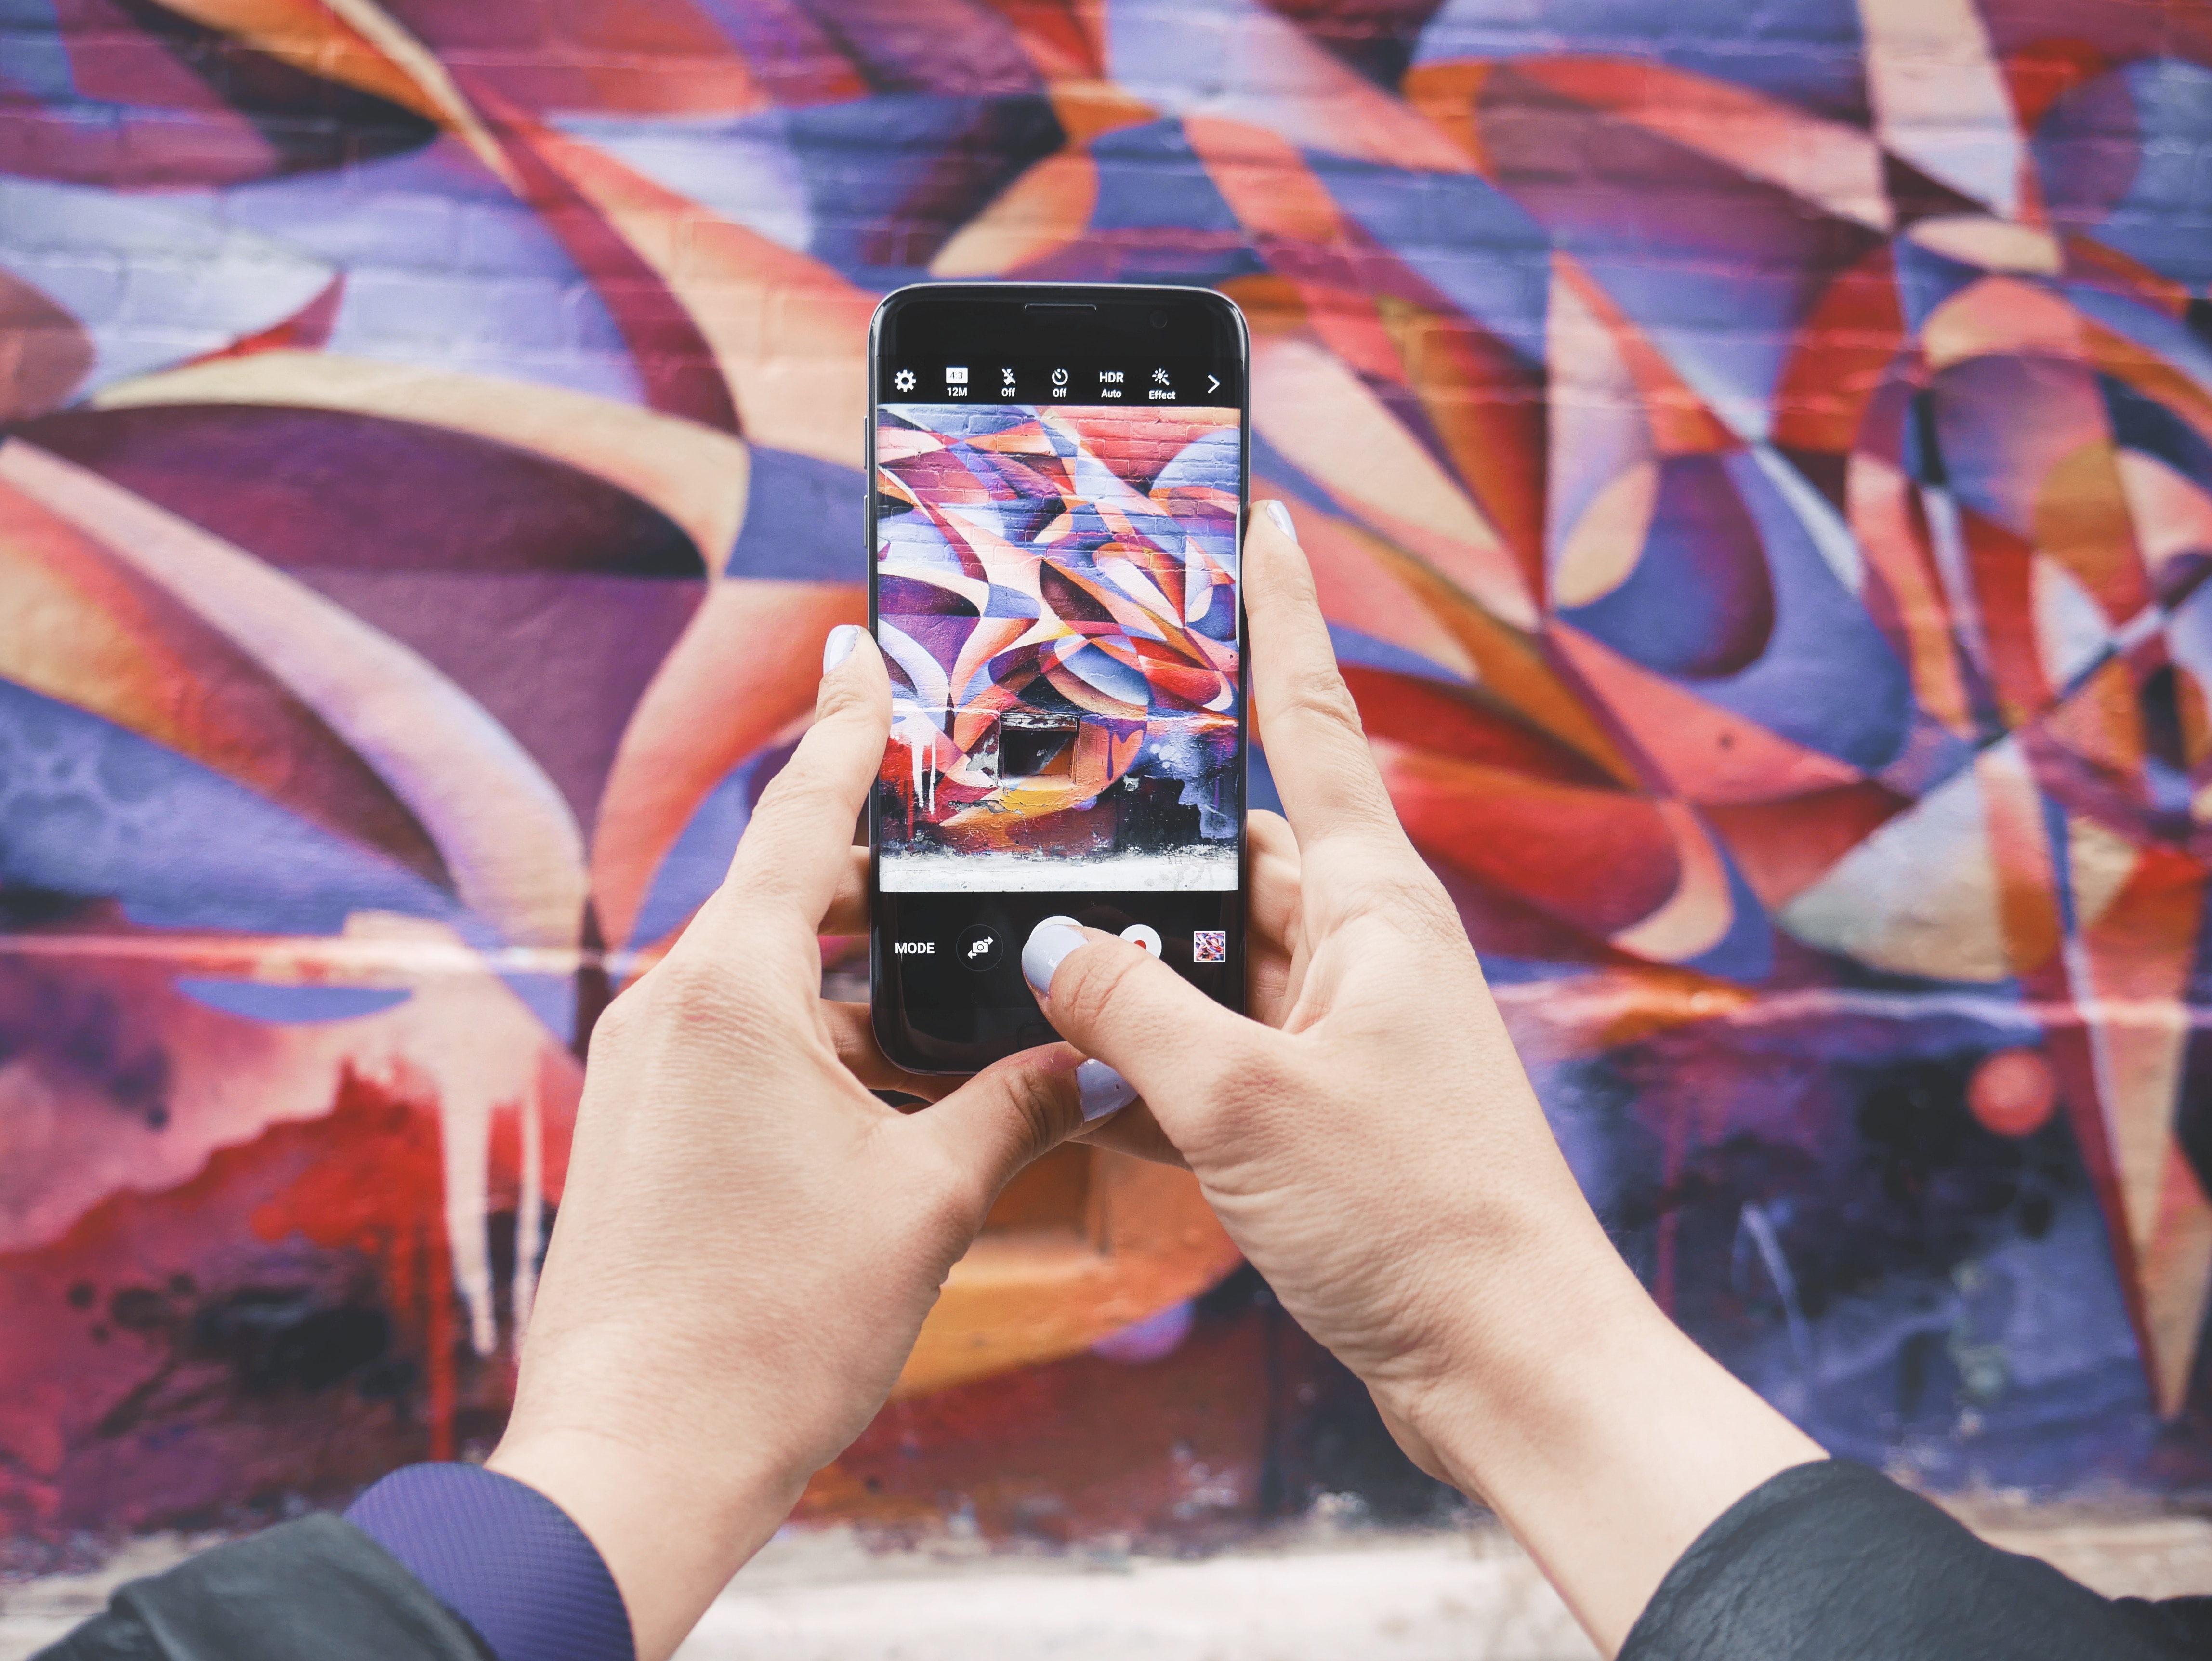 Interactive Wallpaper Apps You Can Use To Customize - Taking Picture Of Graffiti , HD Wallpaper & Backgrounds